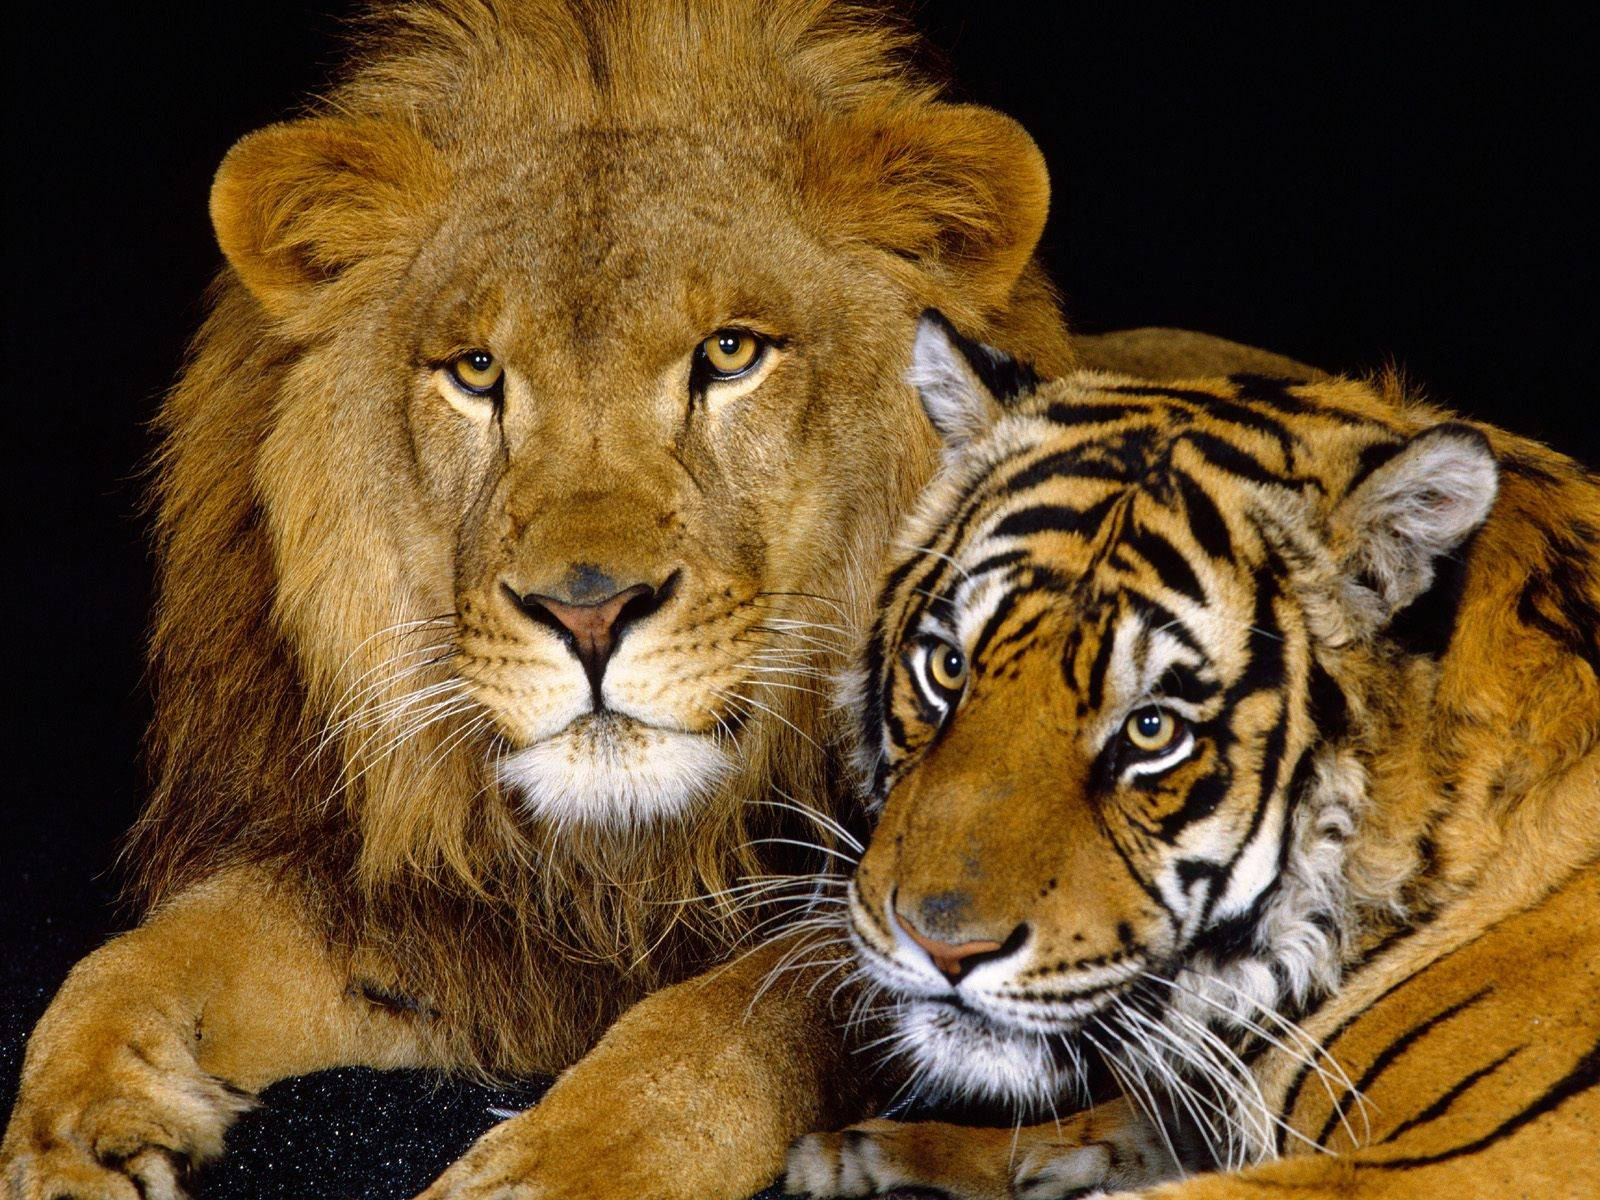 Free Lion And Tiger Wallpaper Downloads, Lion And Tiger Wallpaper for FREE